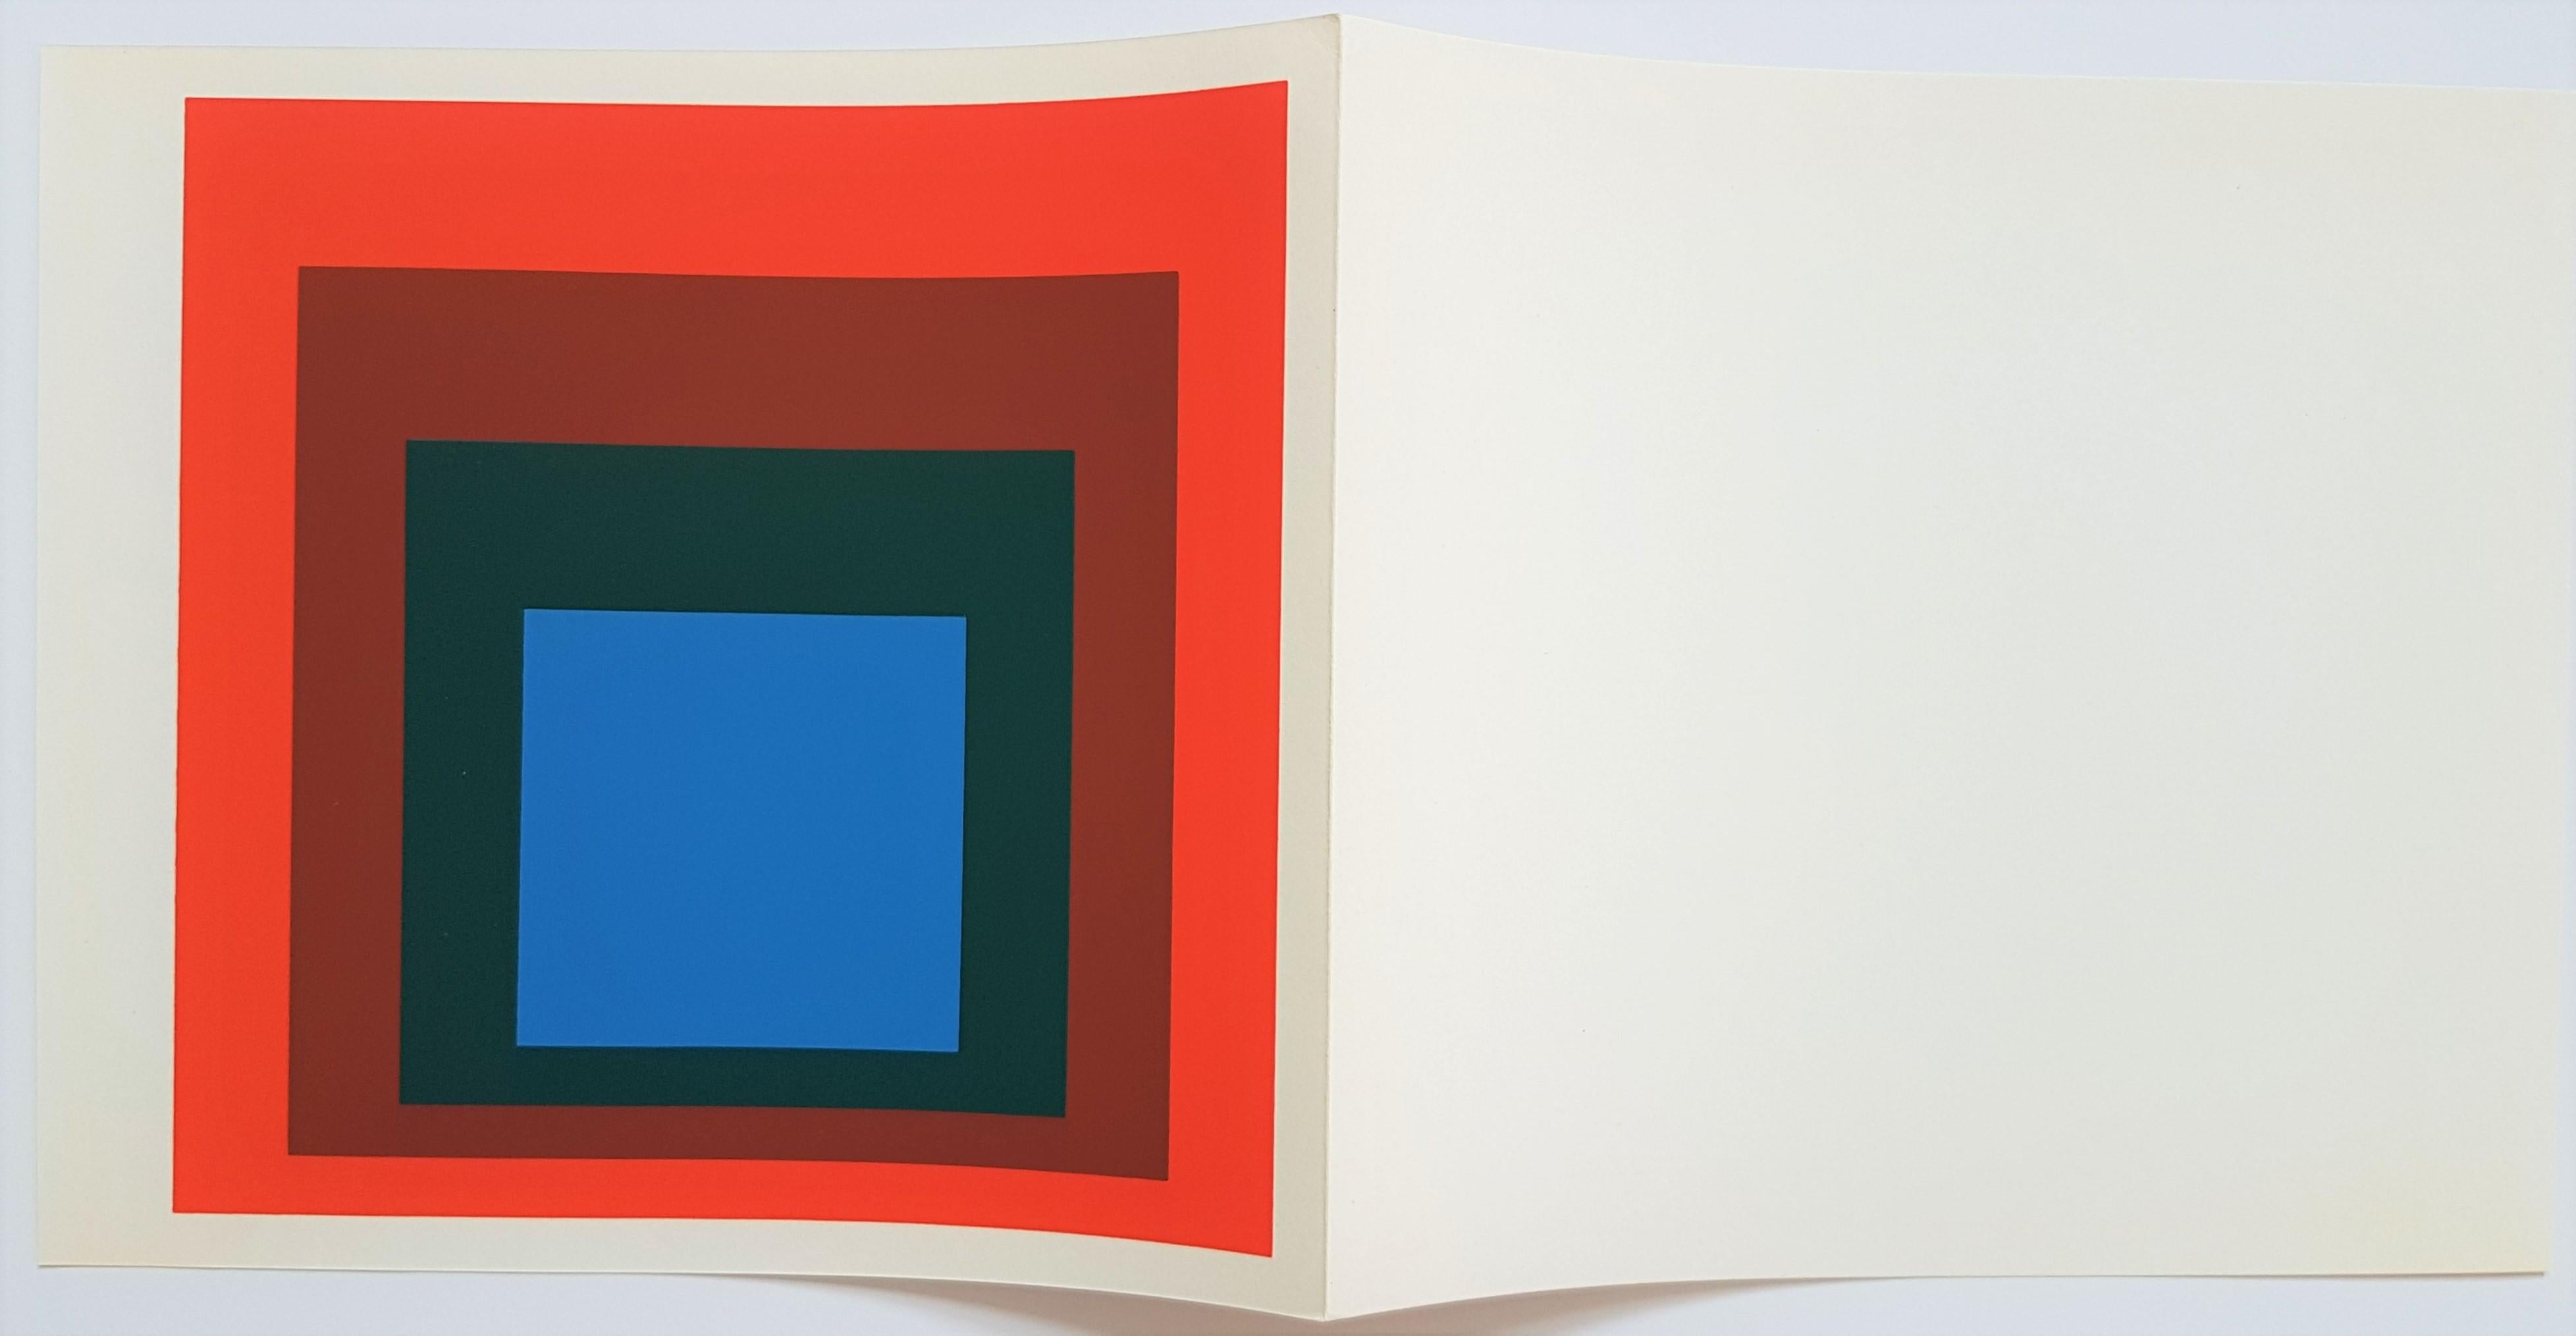 Homage to the Square: Blue + Darkgreen with 2 Reds (~35% OFF LIST PRICE) - Contemporary Print by (after) Josef Albers